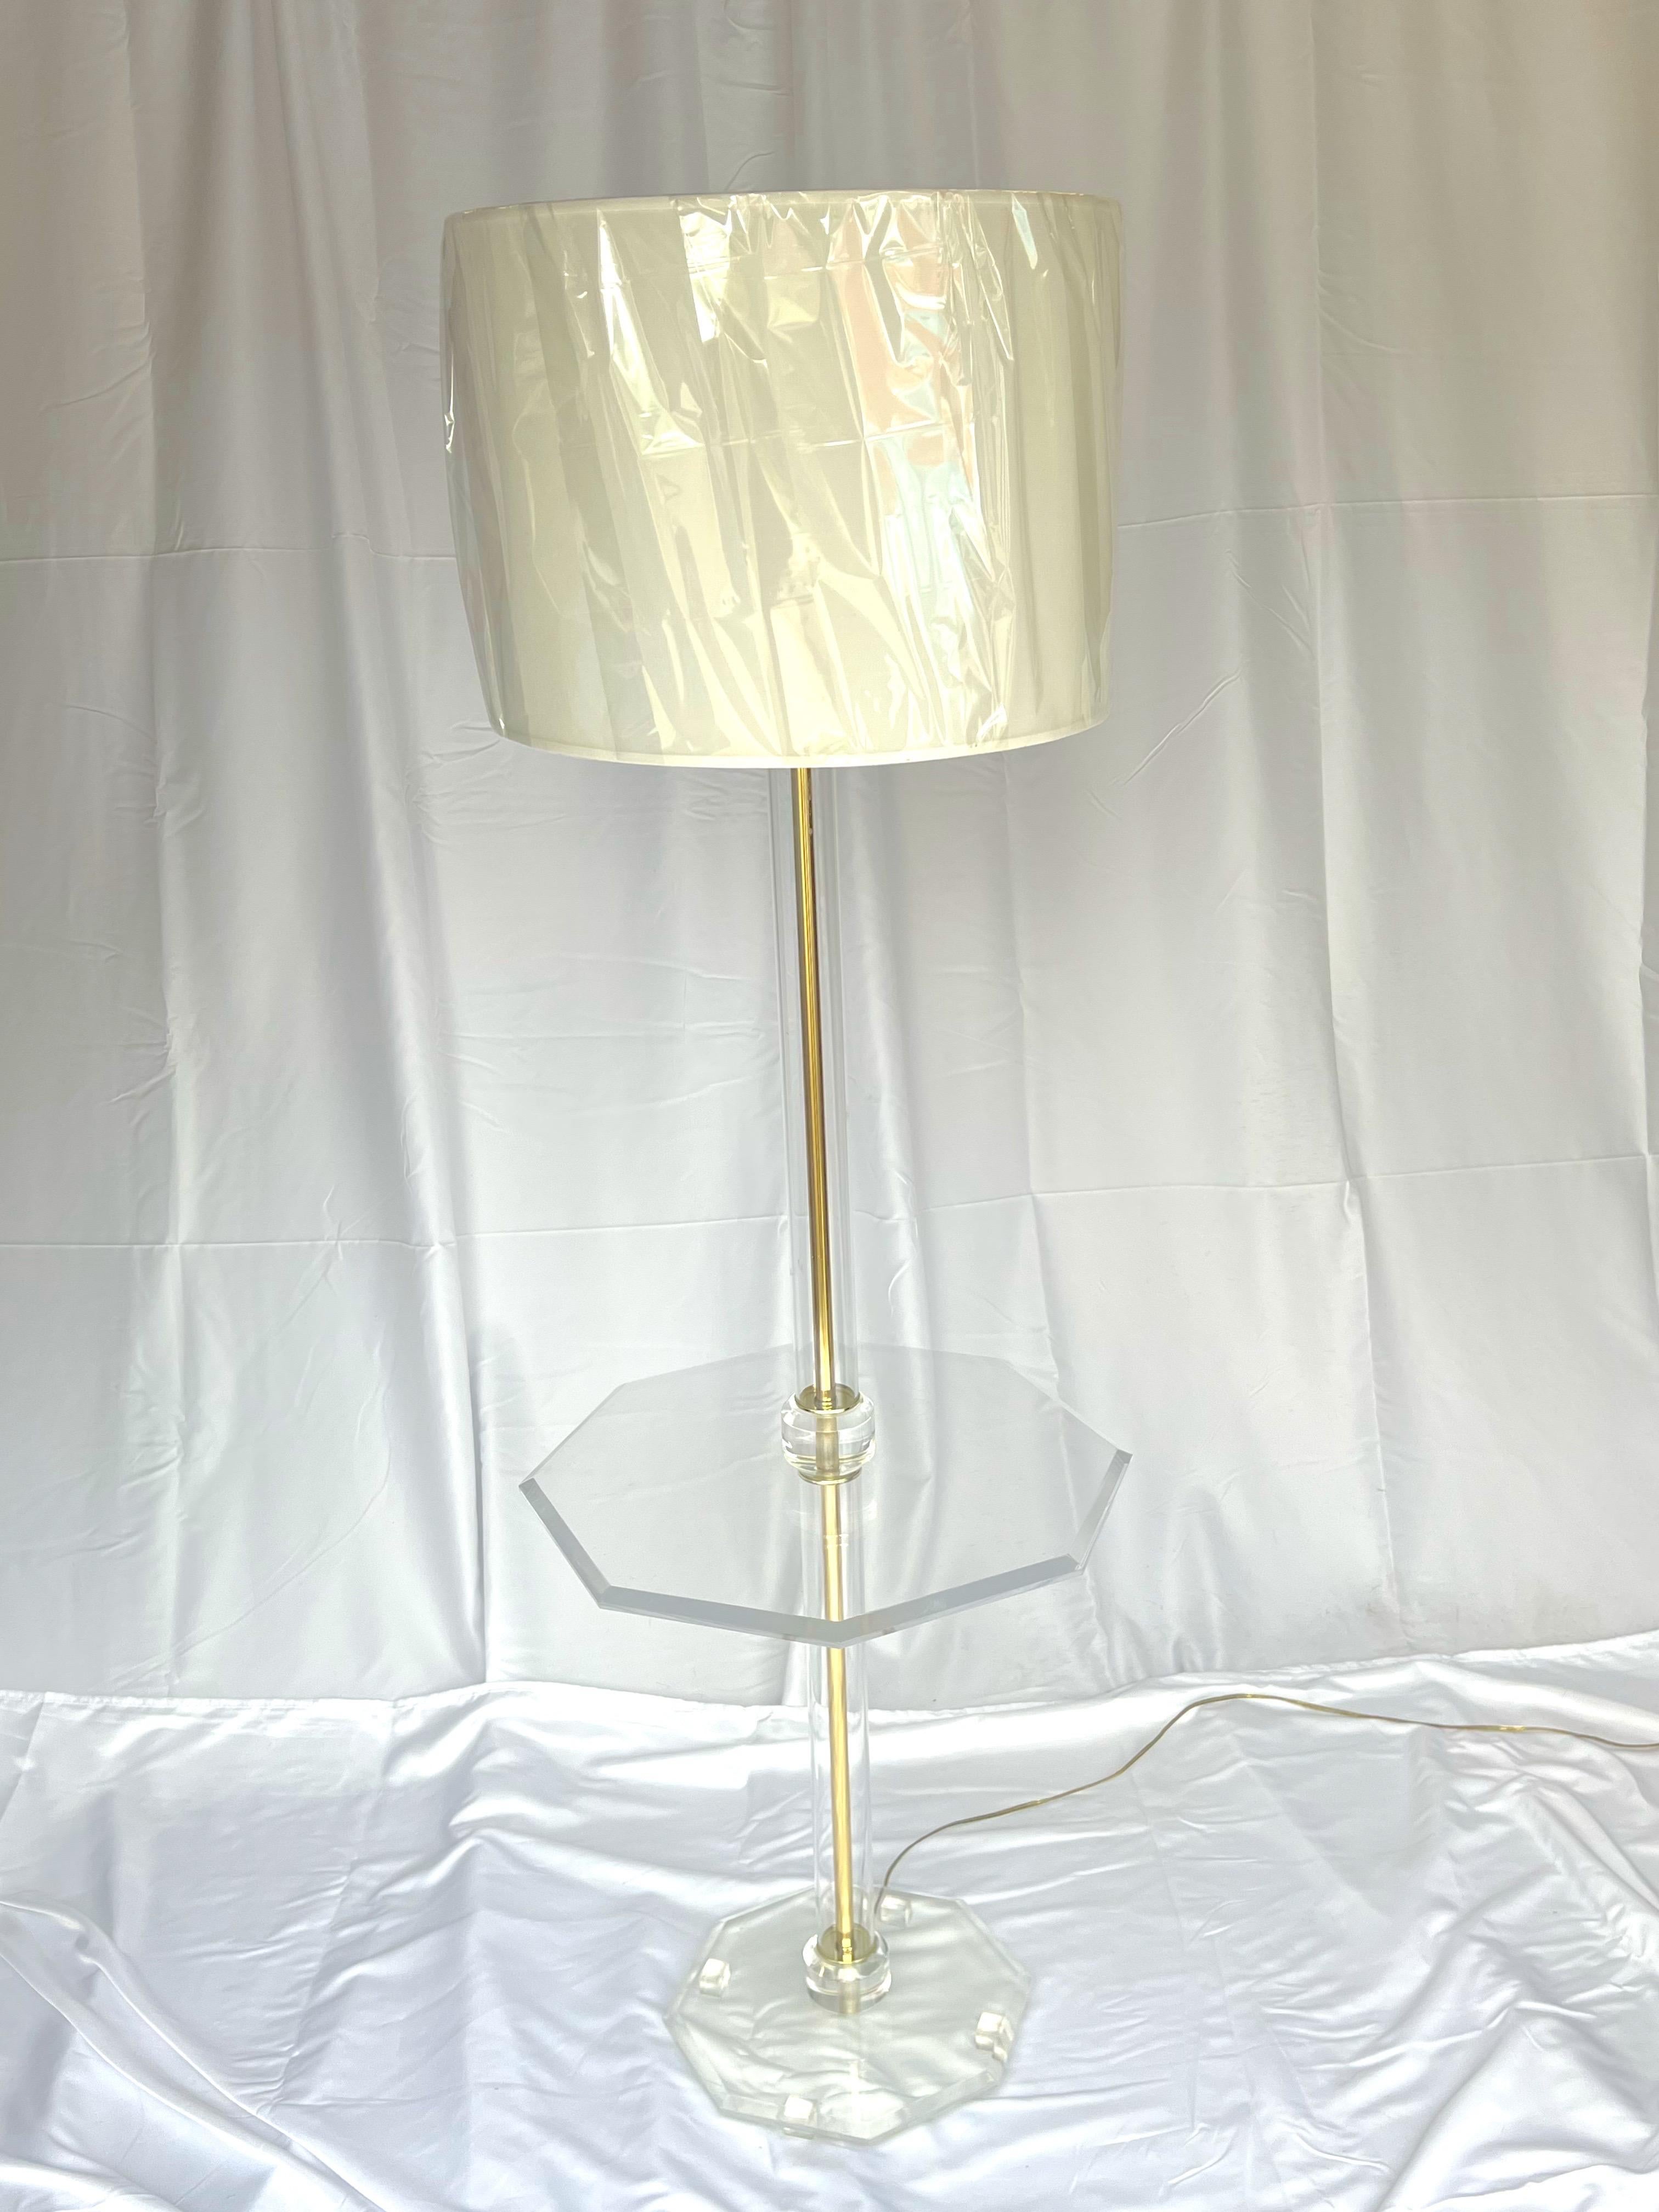 American 1970’s Mid-Century Modern Lucite Floor Lamp With Integrated Table For Sale